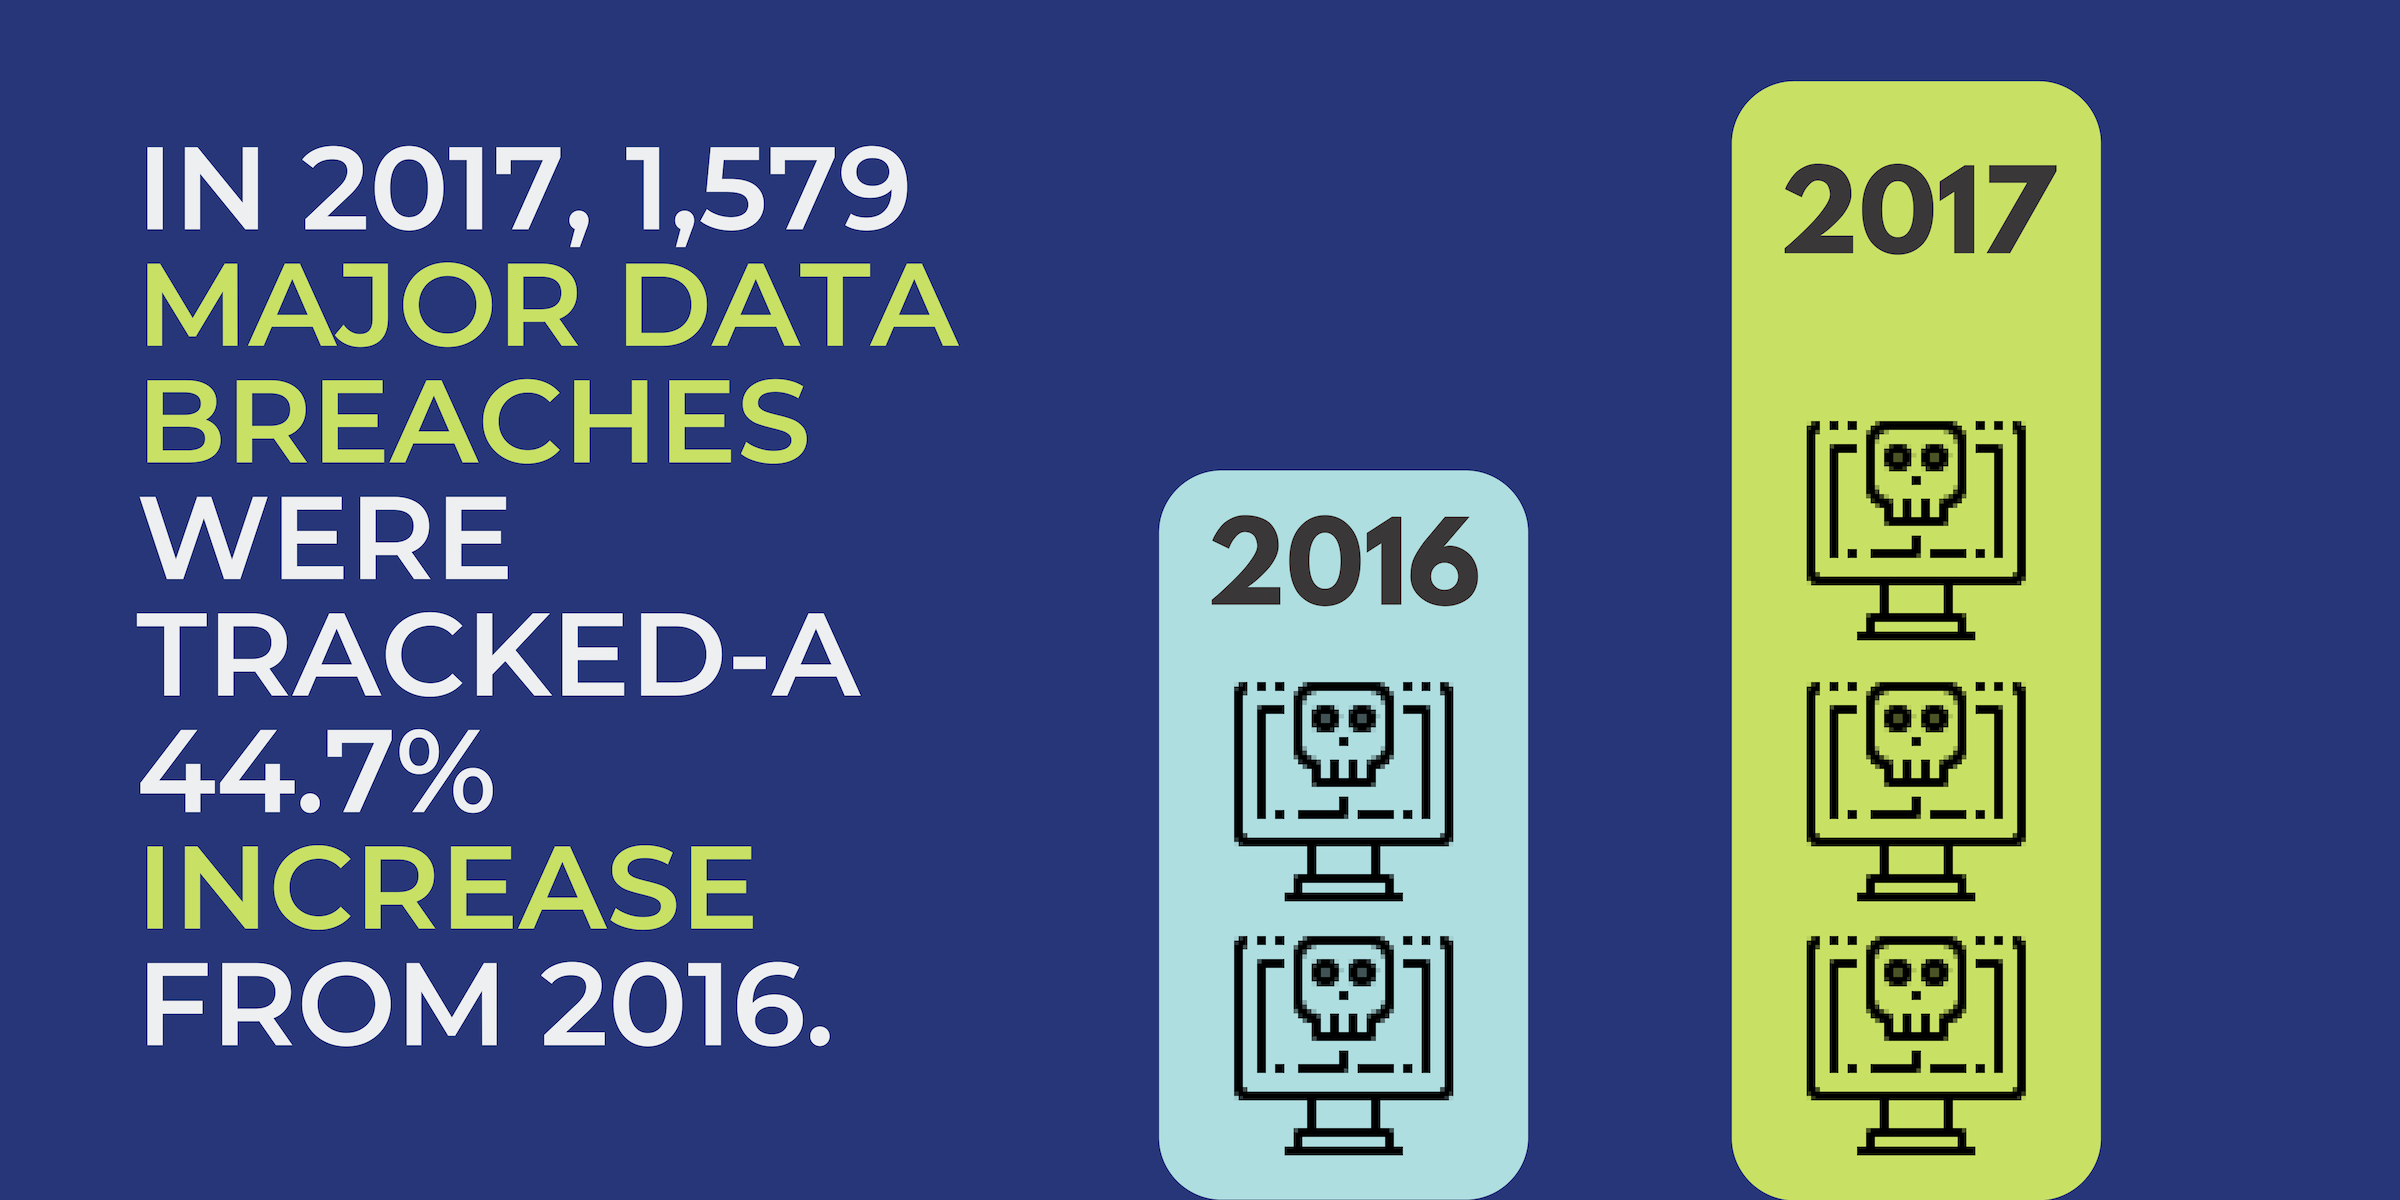 In 2017, 1,579 major data breaches were tracked-A 44.7% increase from 2016.